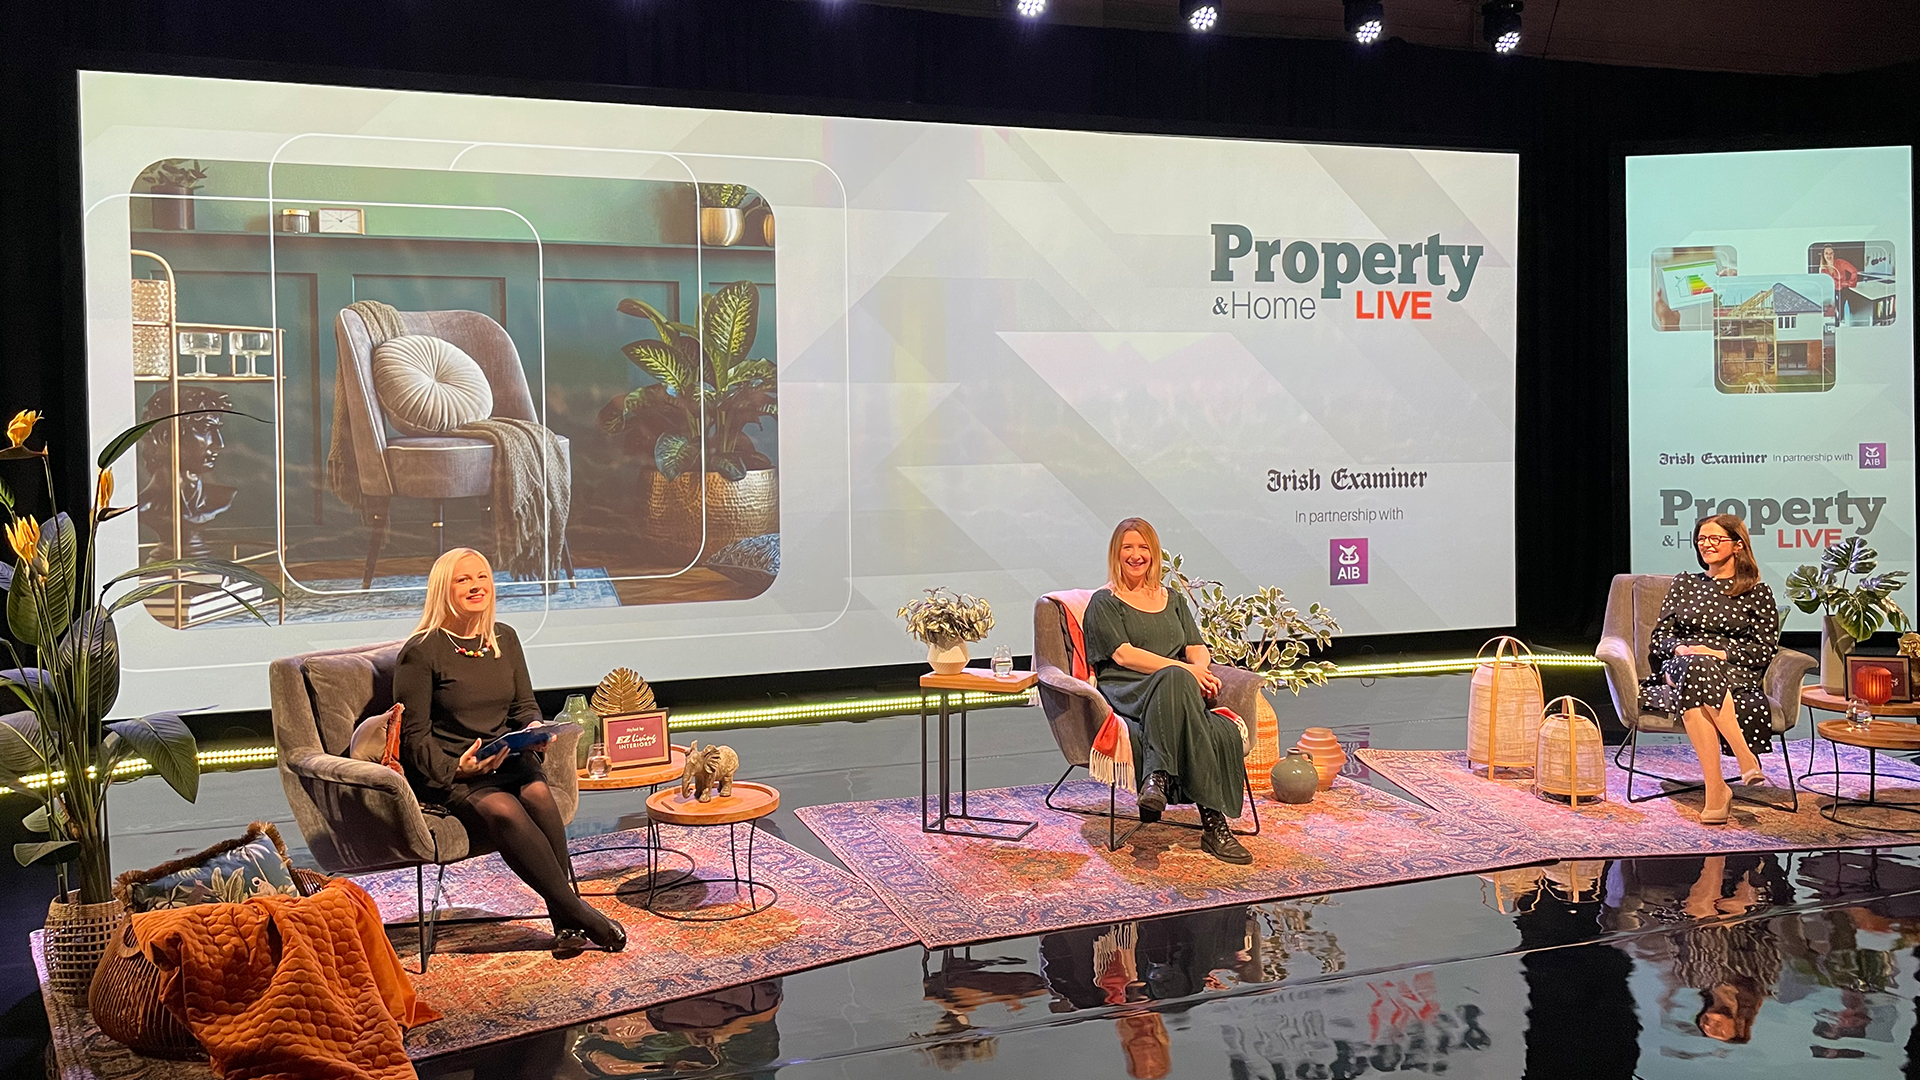 Irish Examiner Property & Home LIVE brought together experts from across the property sector.